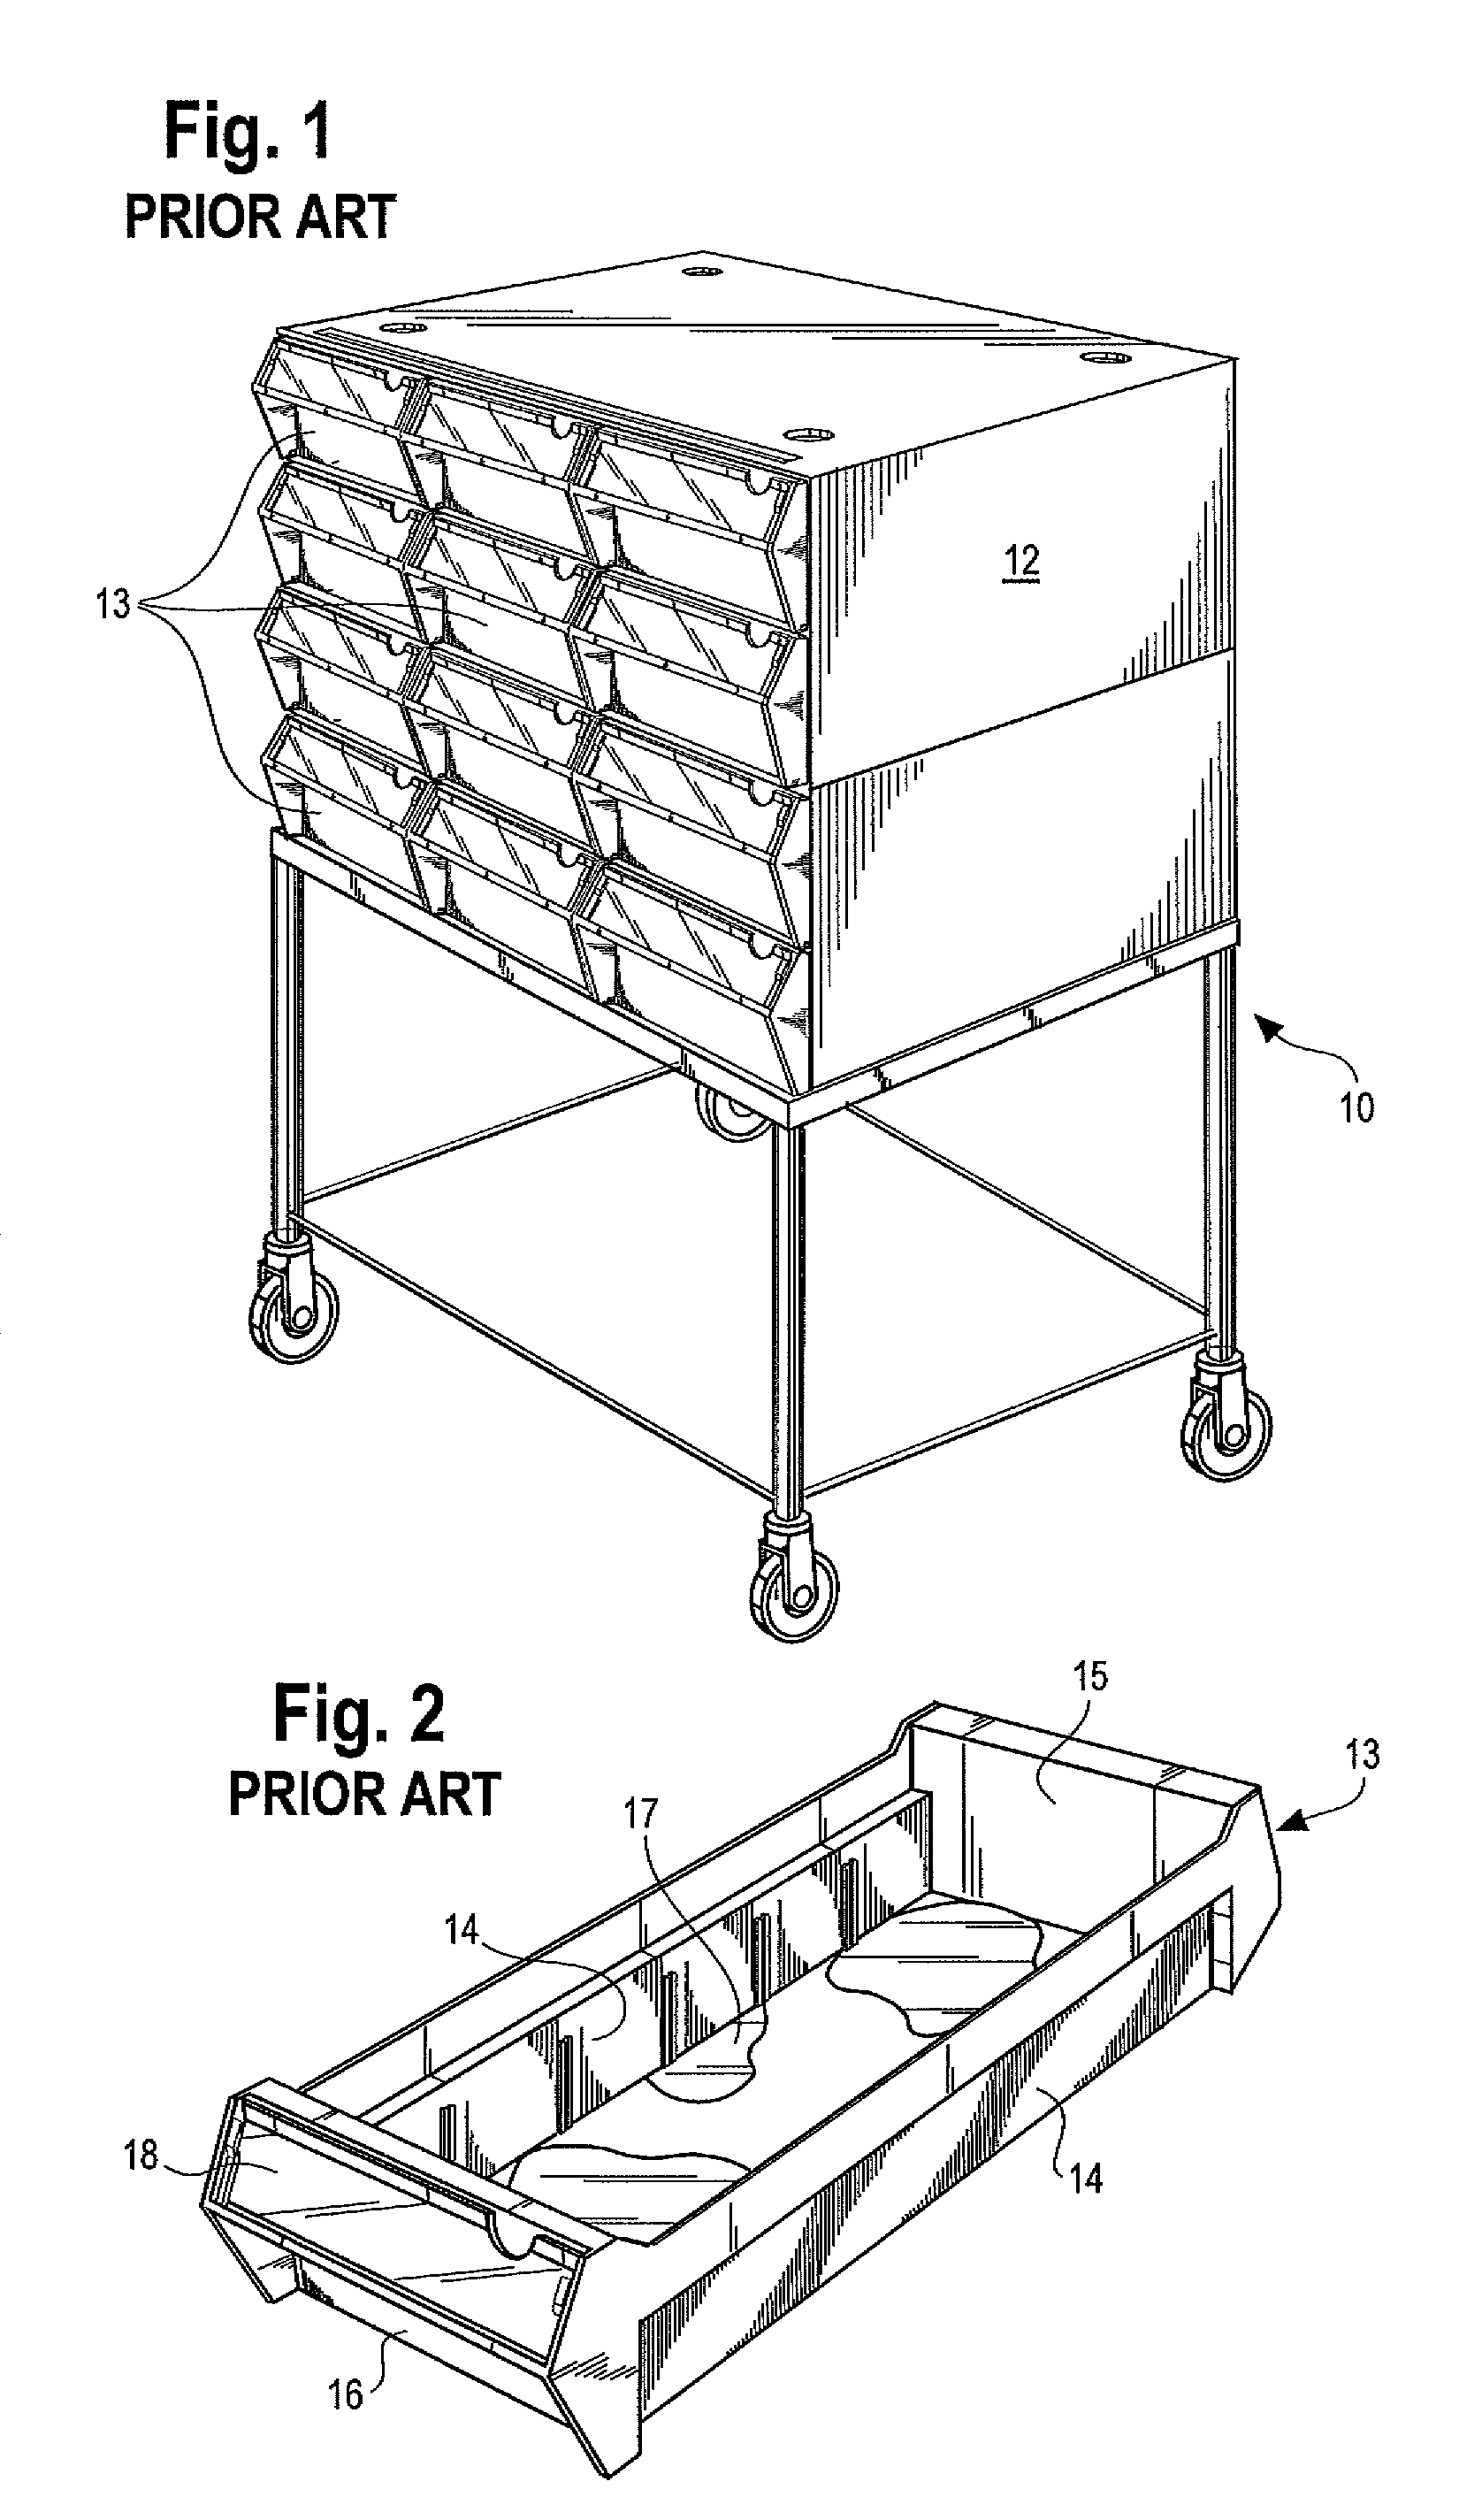 Medication cart drawer liner and method for using same to reduce nosocomial infections